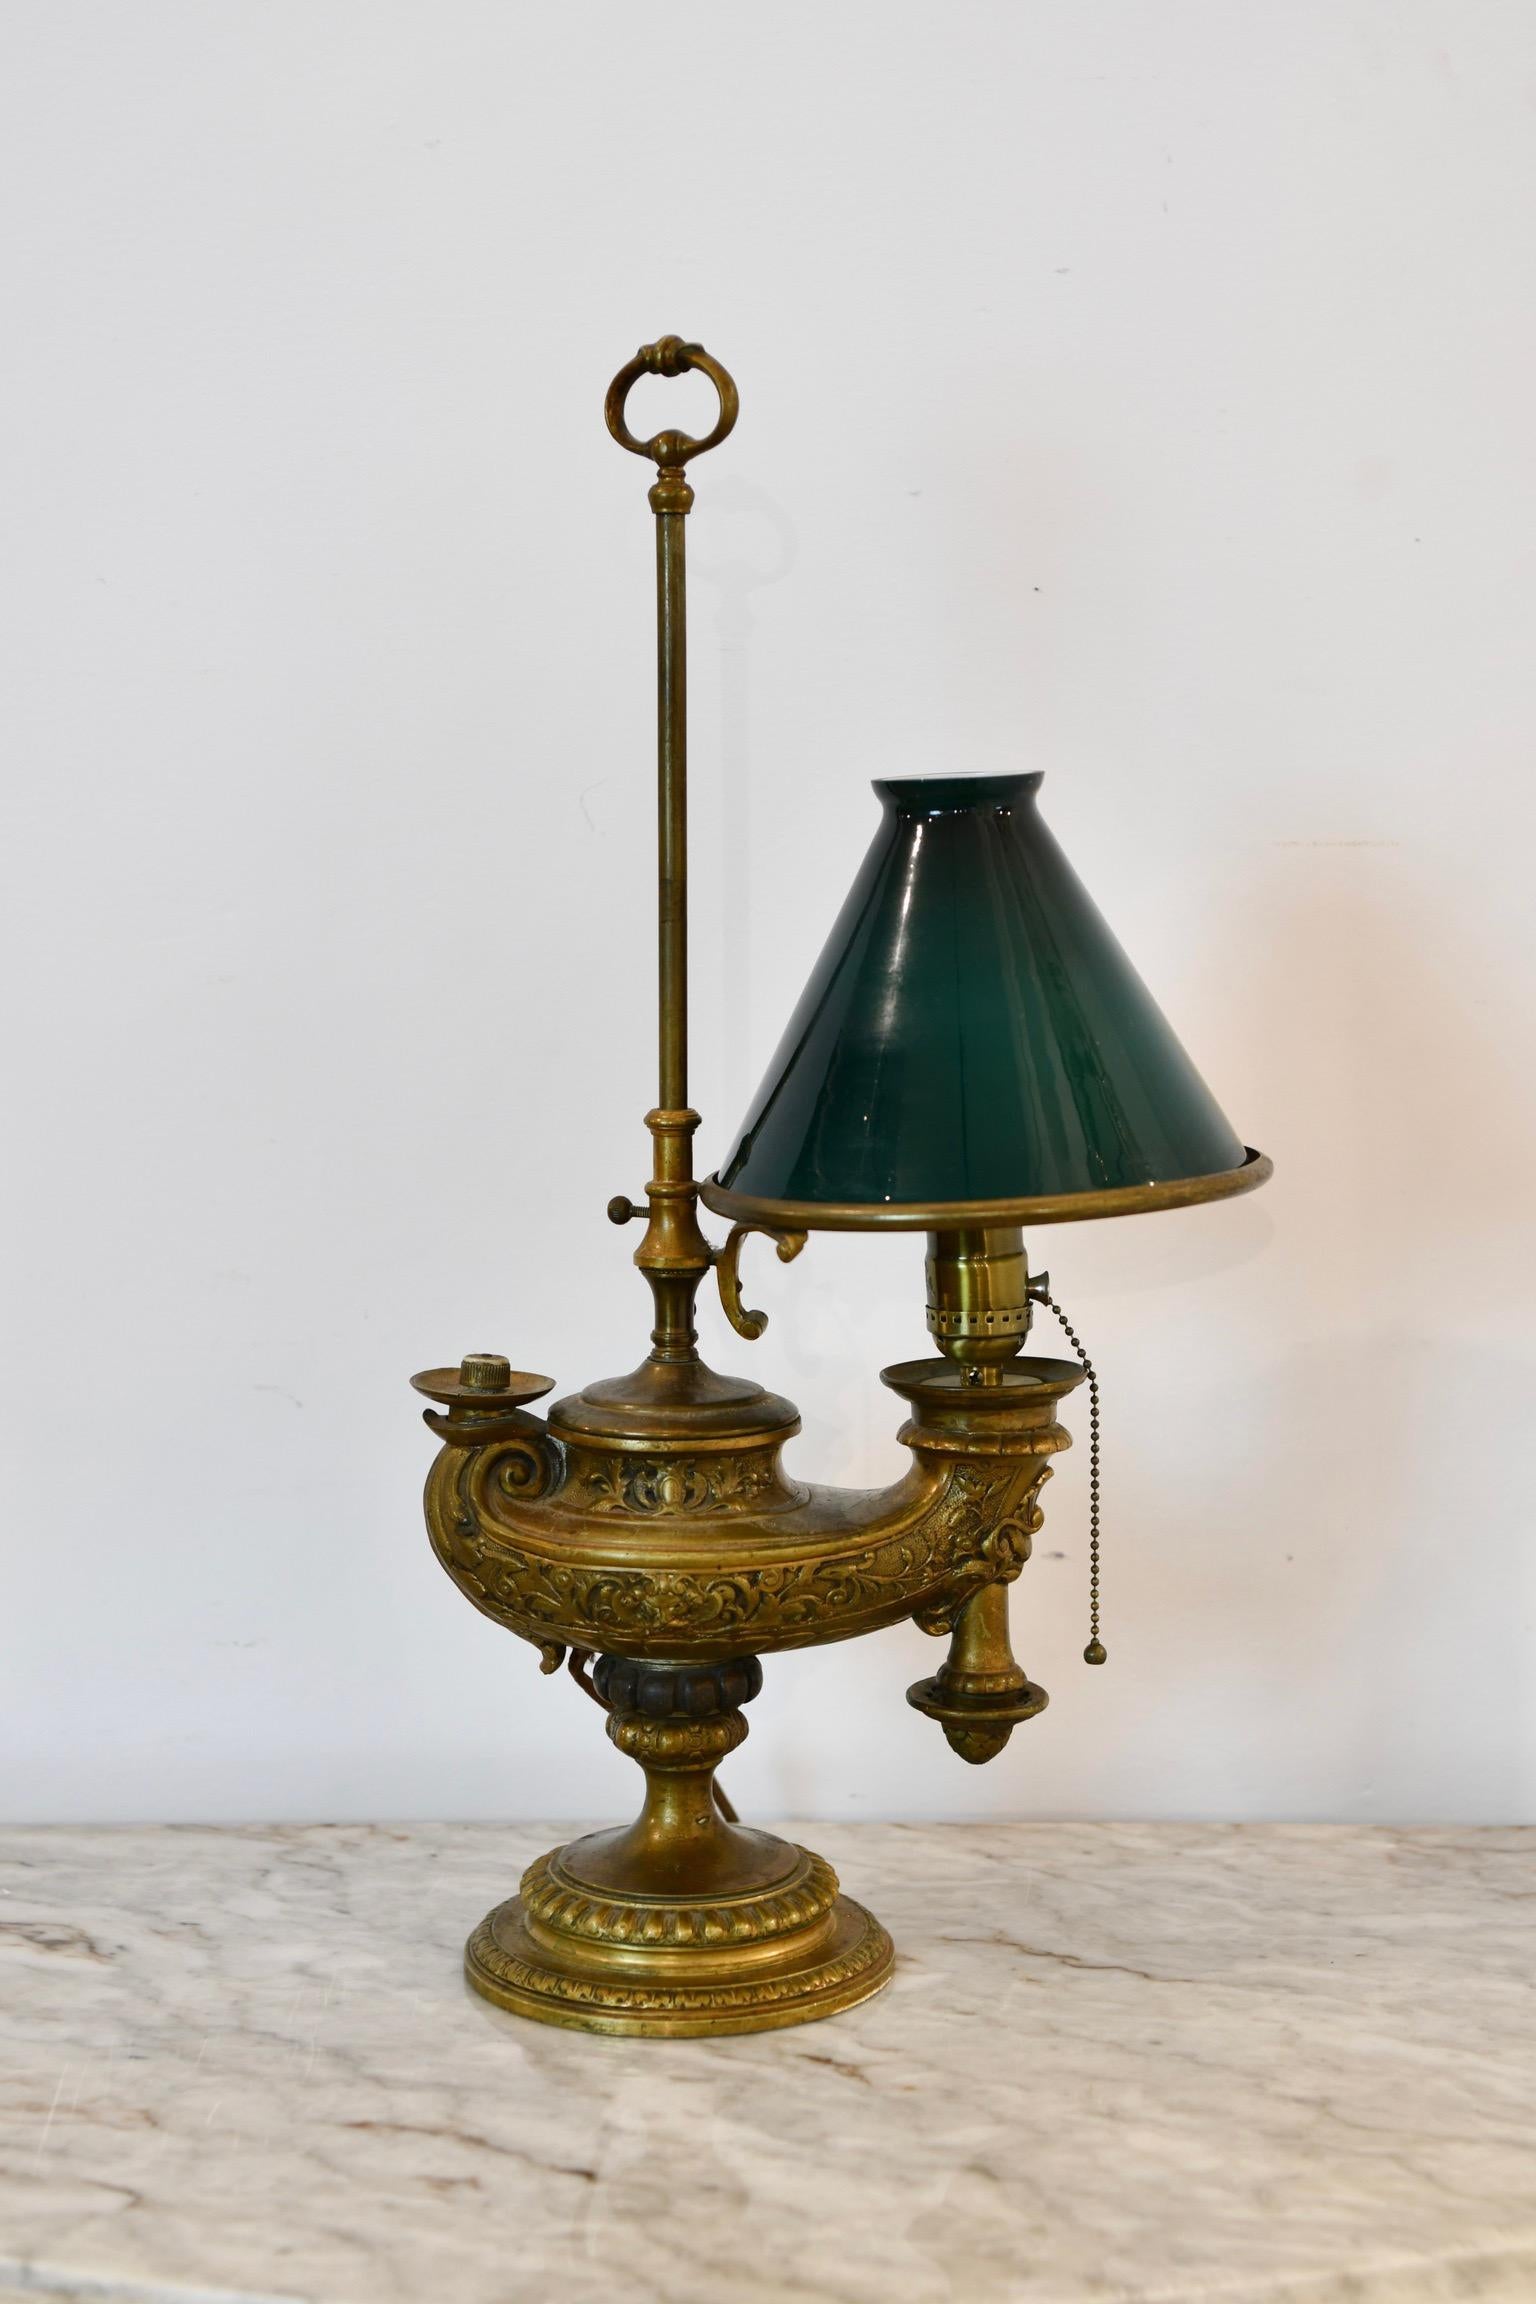 Brass genie electrified student lamp with green cased glass shade. Dimensions: 21.5